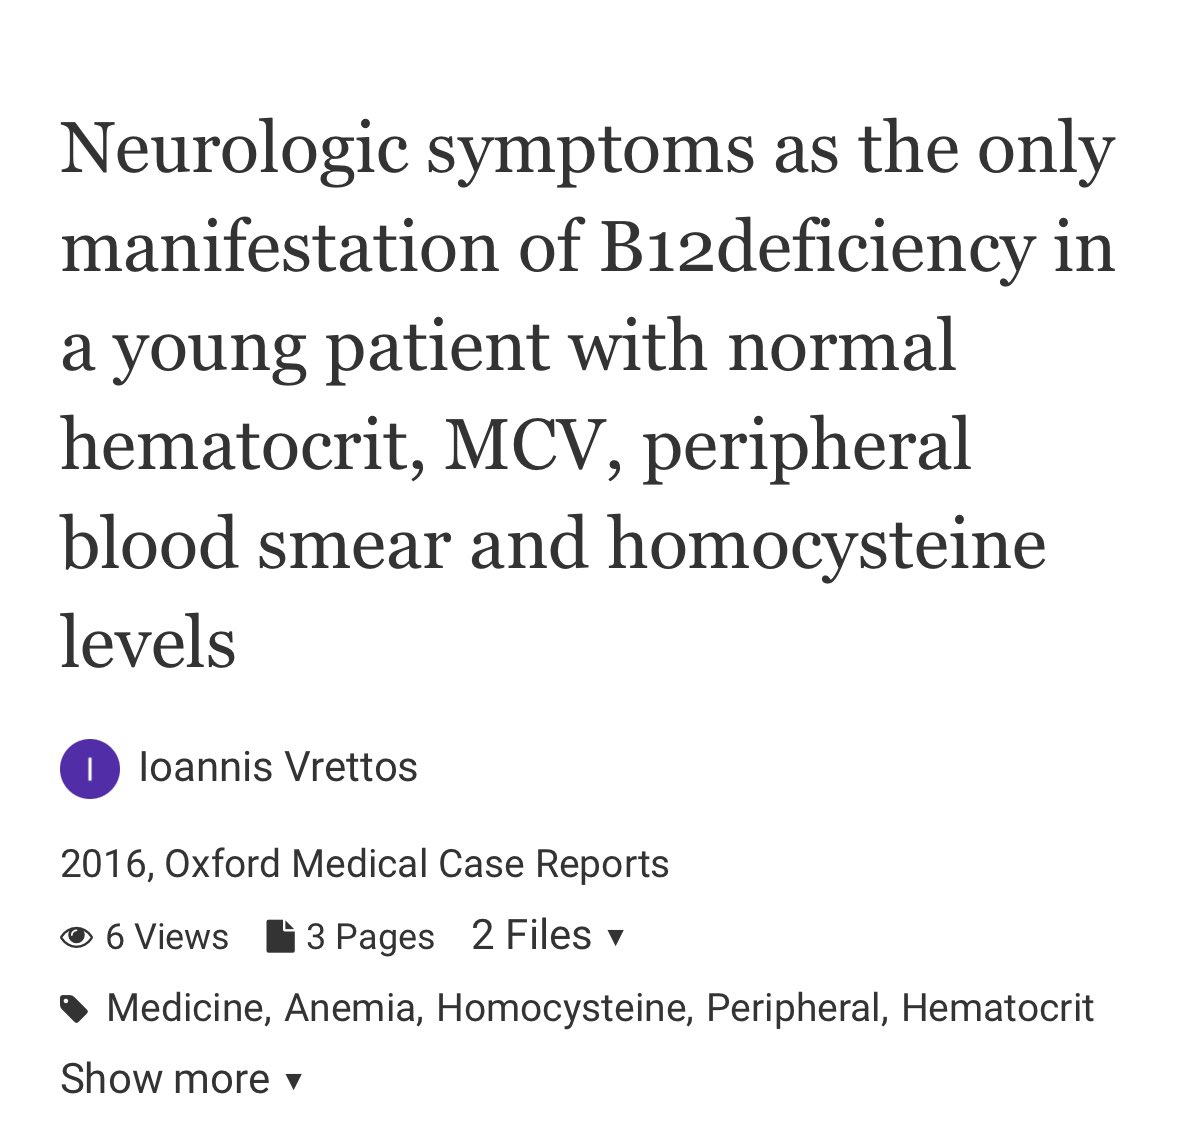 Neurologic symptoms as the only manifestation of B12 Deficiency in a young patient with normal hematocrit, MCV, peripheral blood smear and homocysteine levels academia.edu/117166280/Neur…